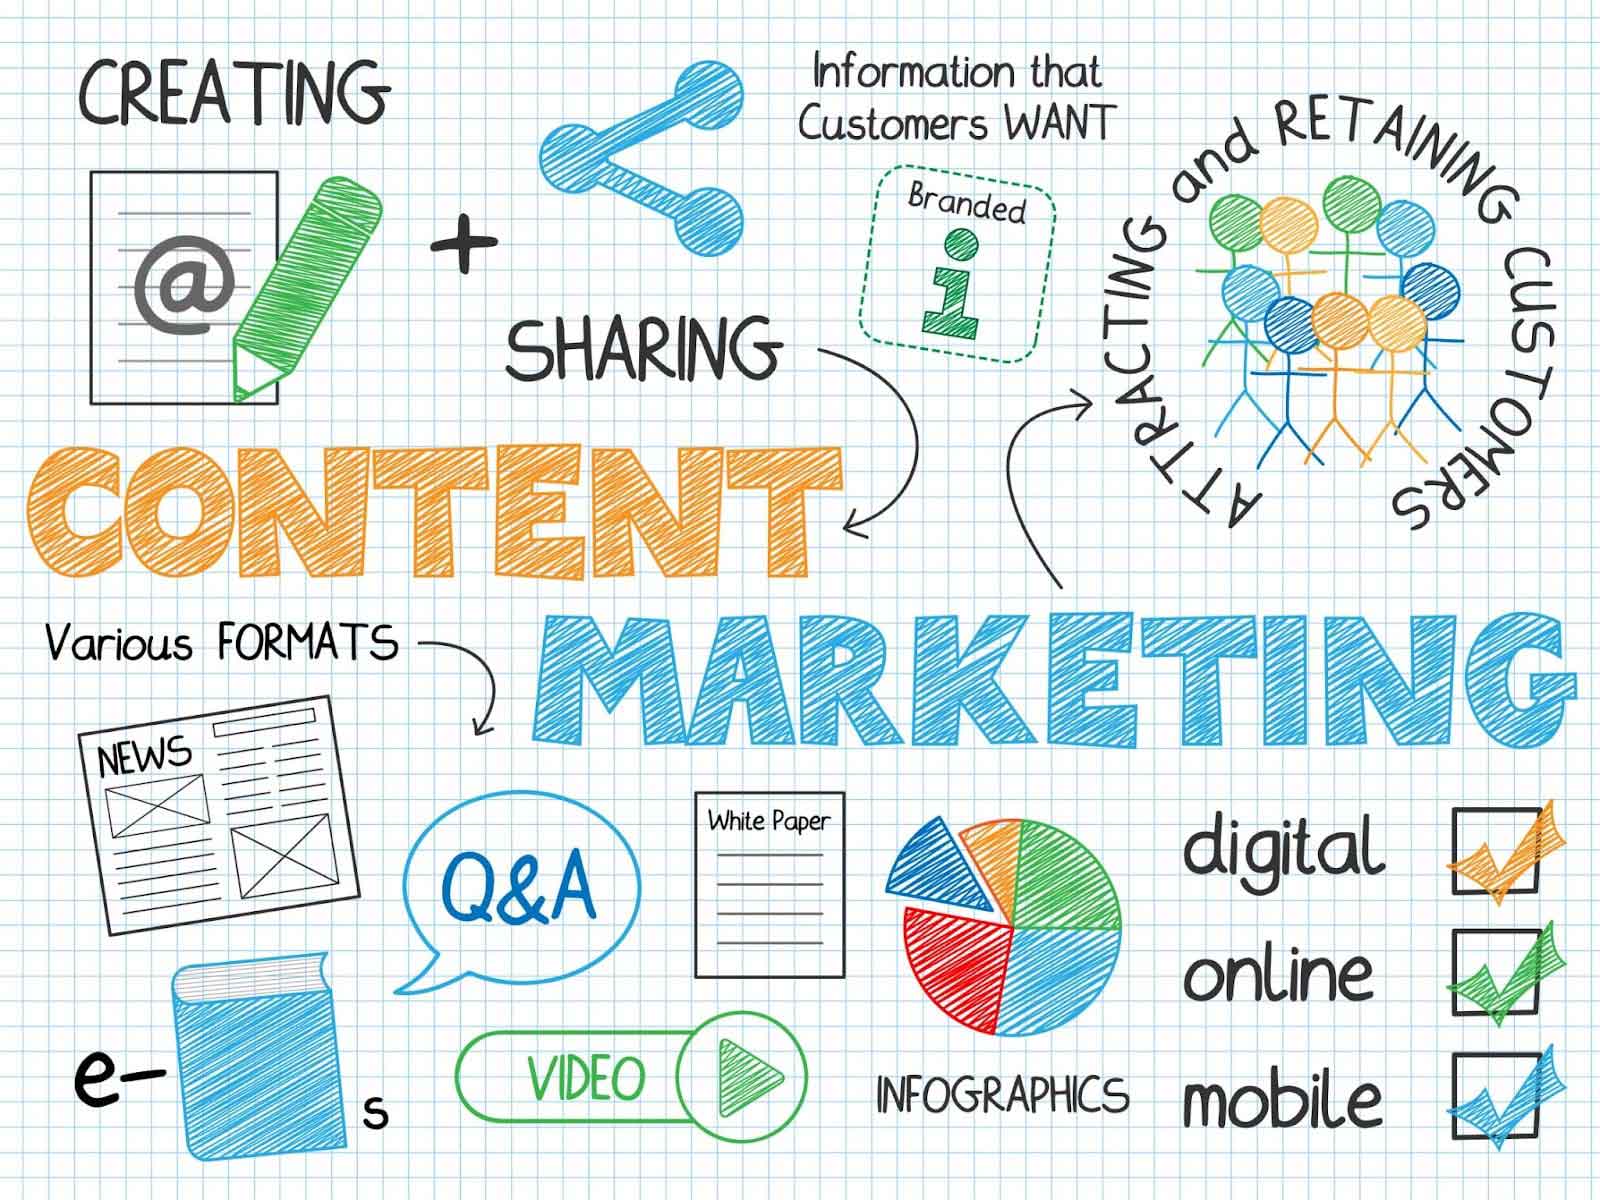 A guide to creating and managing a content marketing campaign strategy